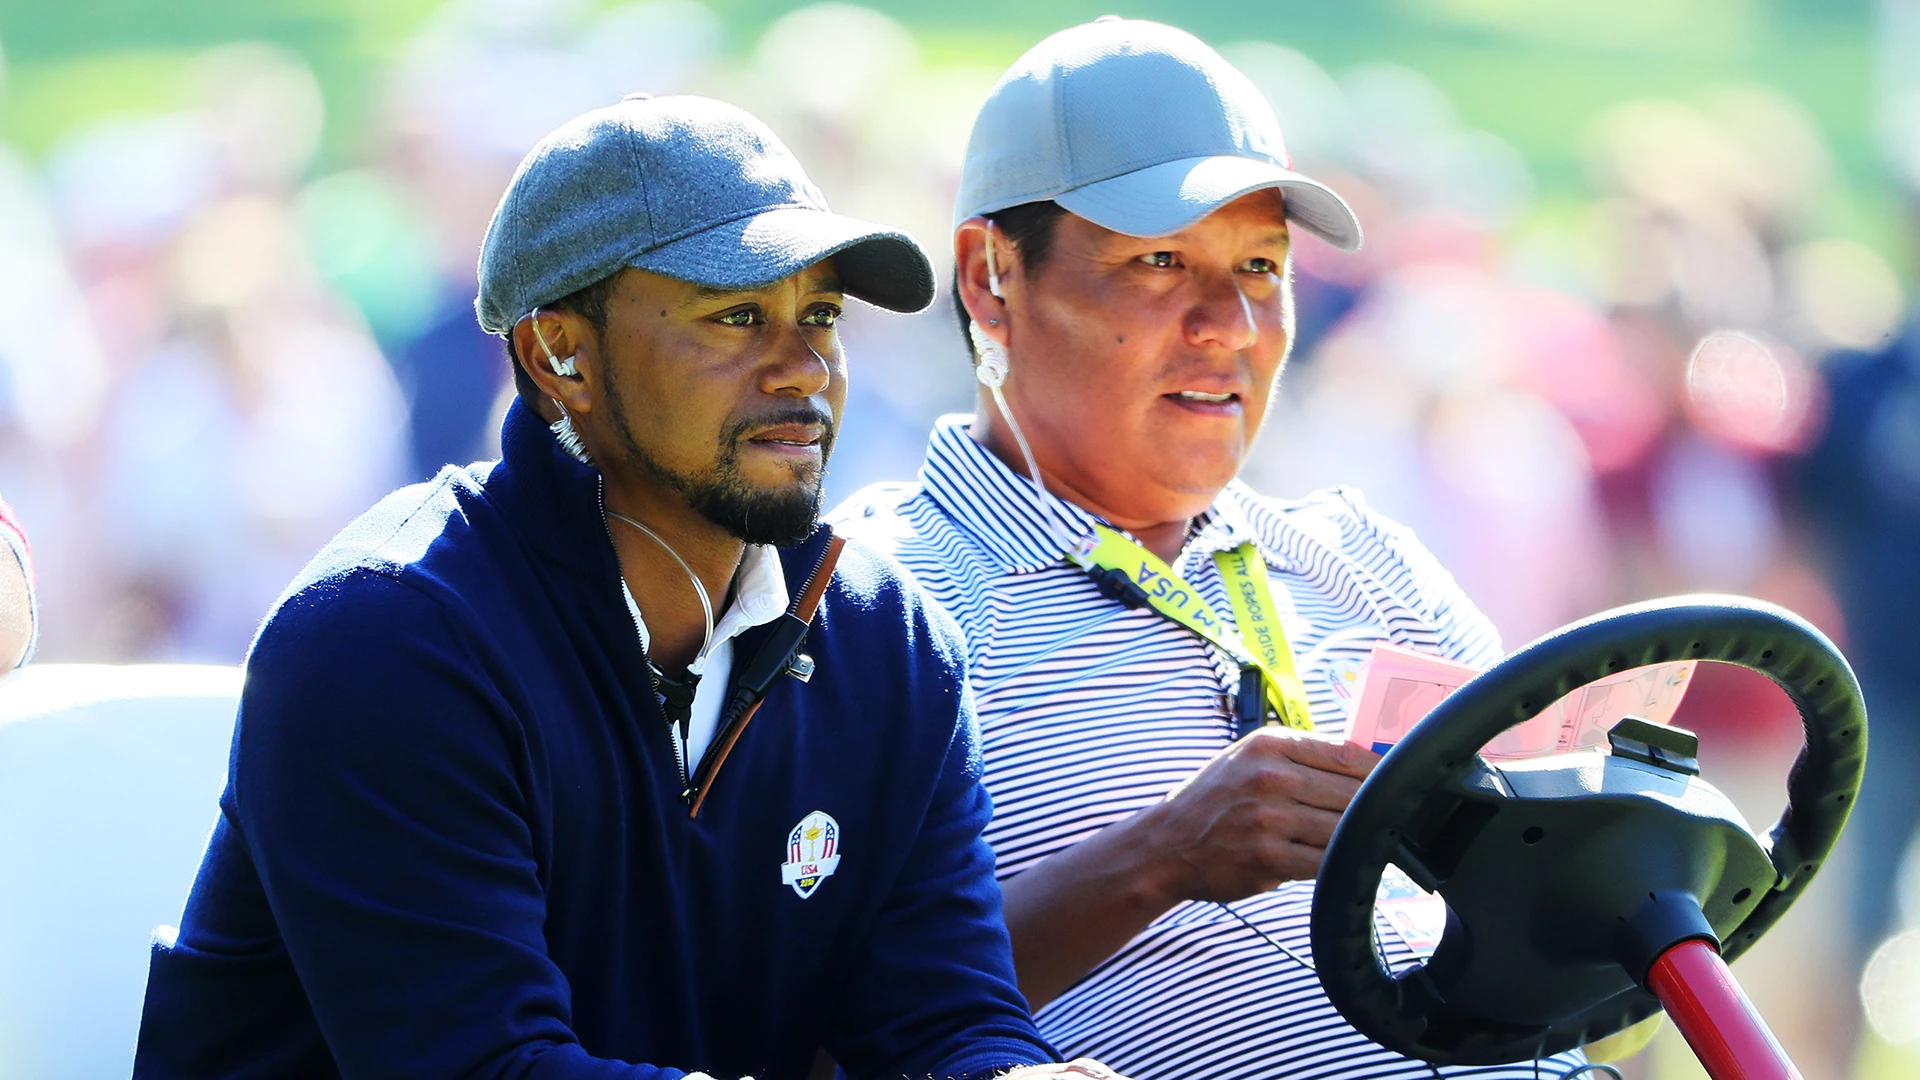 Tiger Woods breaking Sam Snead’s record? Don’t bet against him, says Notah Begay